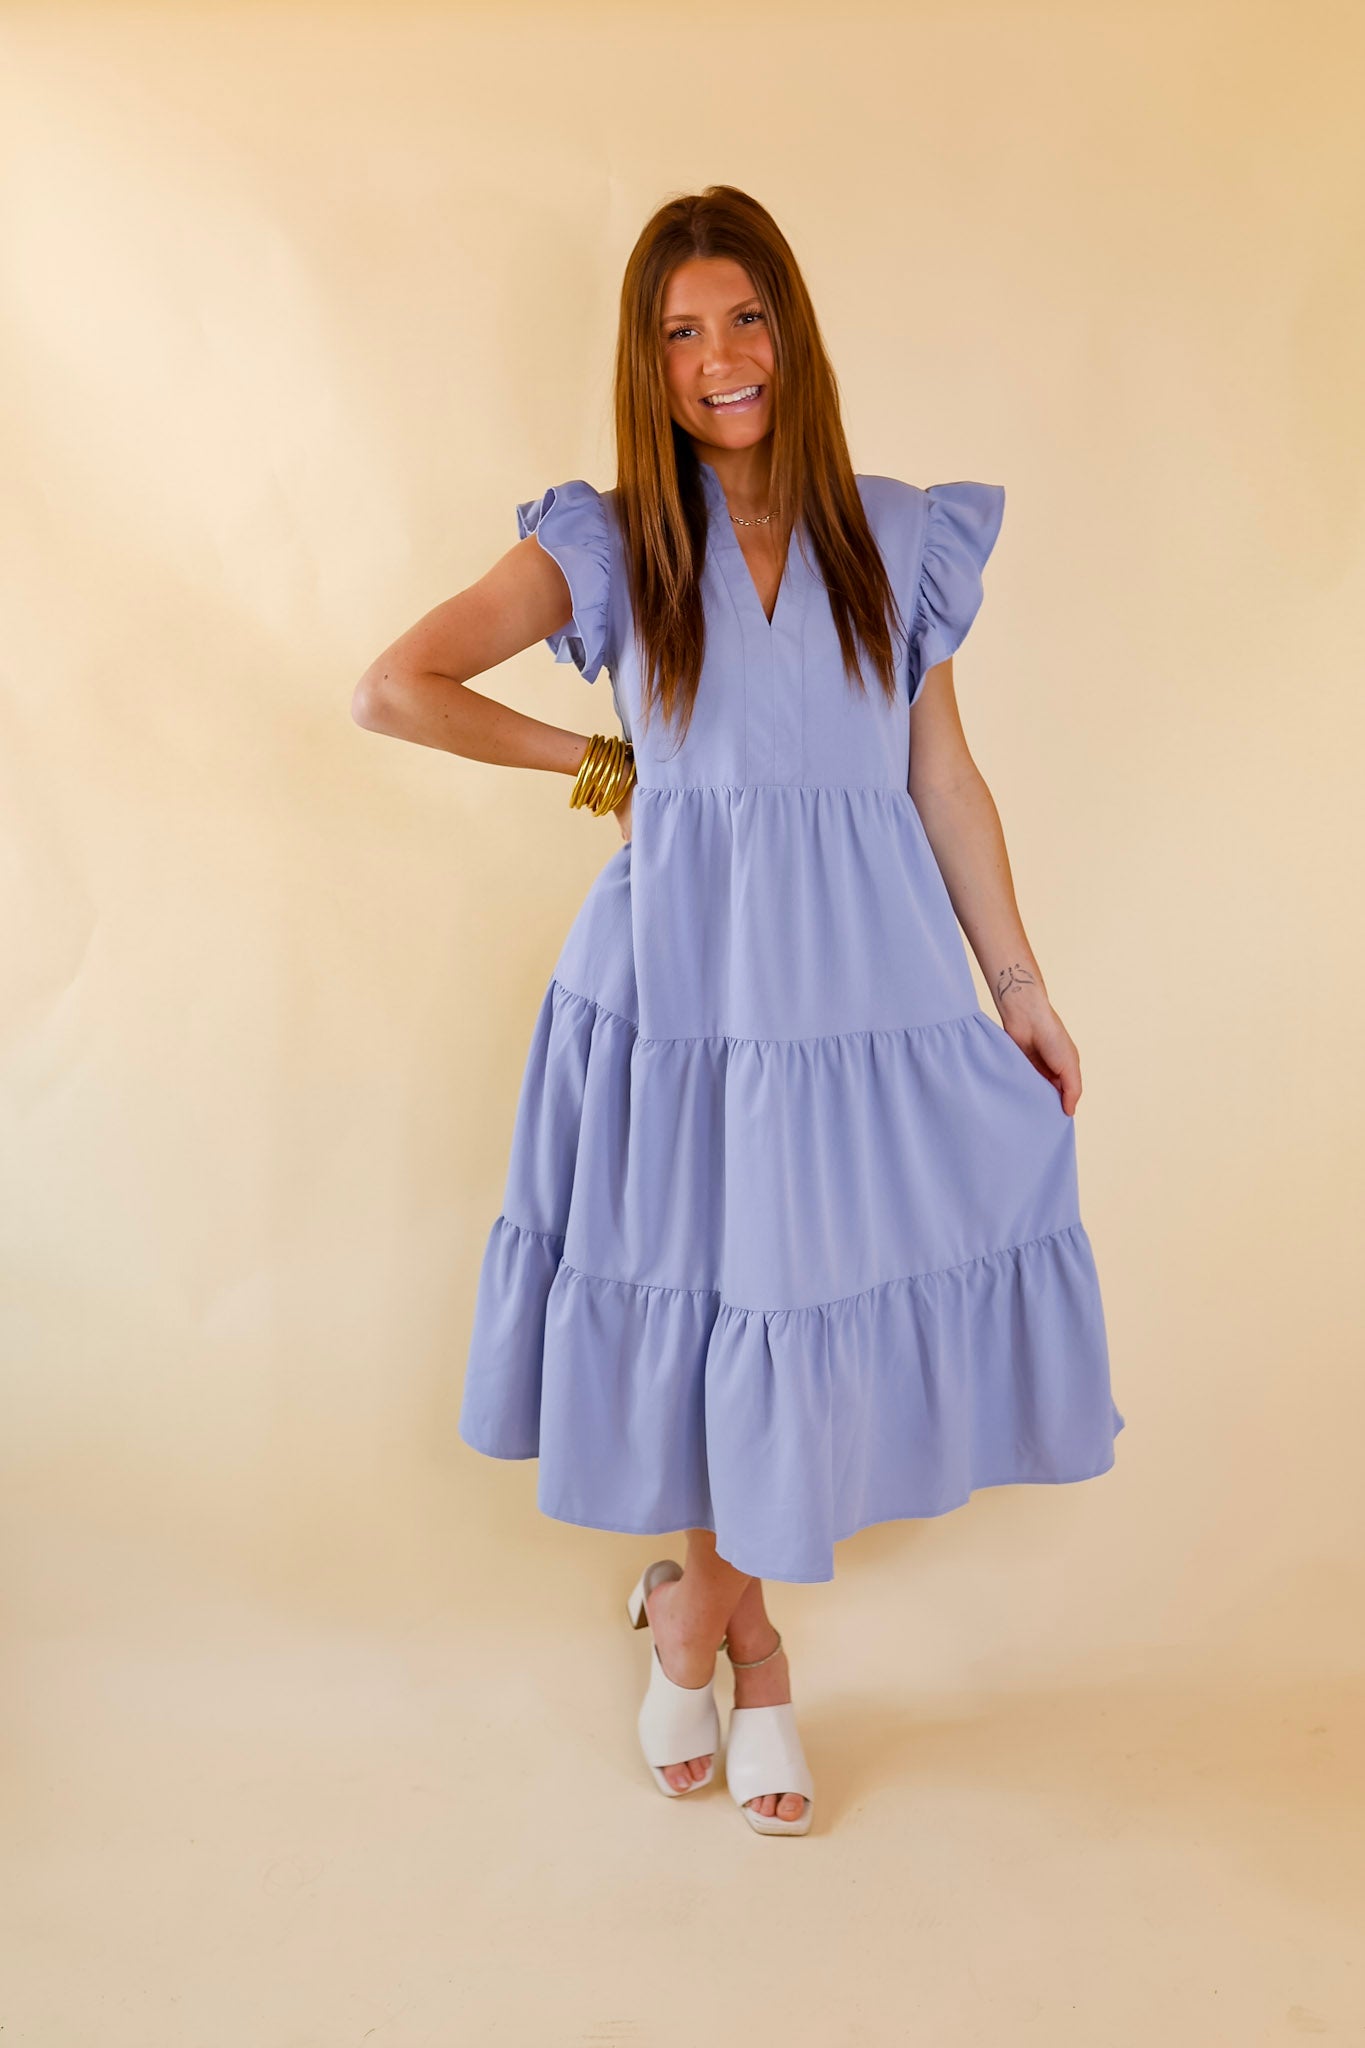 Magnolia Morning Ruffle Cap Sleeve Tiered Midi Dress in Periwinkle Blue - Giddy Up Glamour Boutique